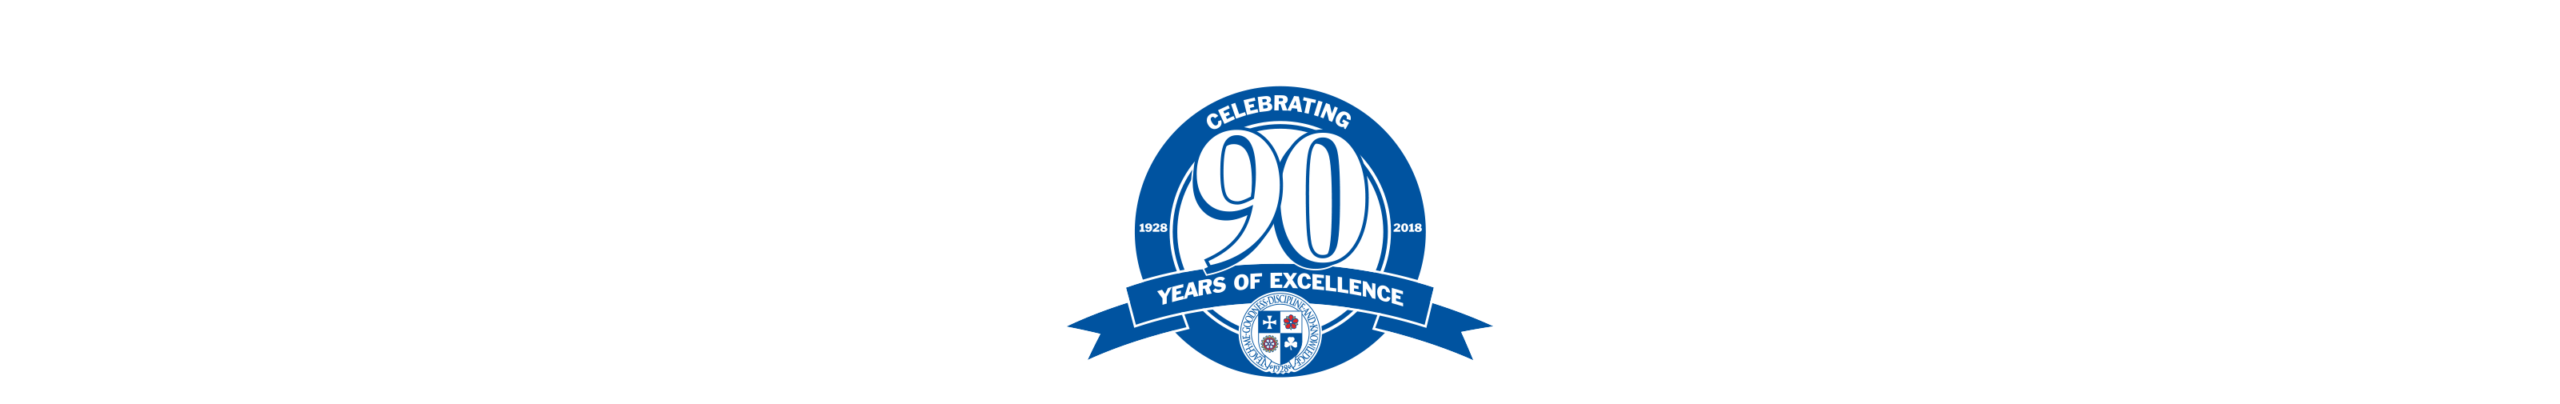 Detroit Catholic Central 90th anniversary logo designed by Anne Ink